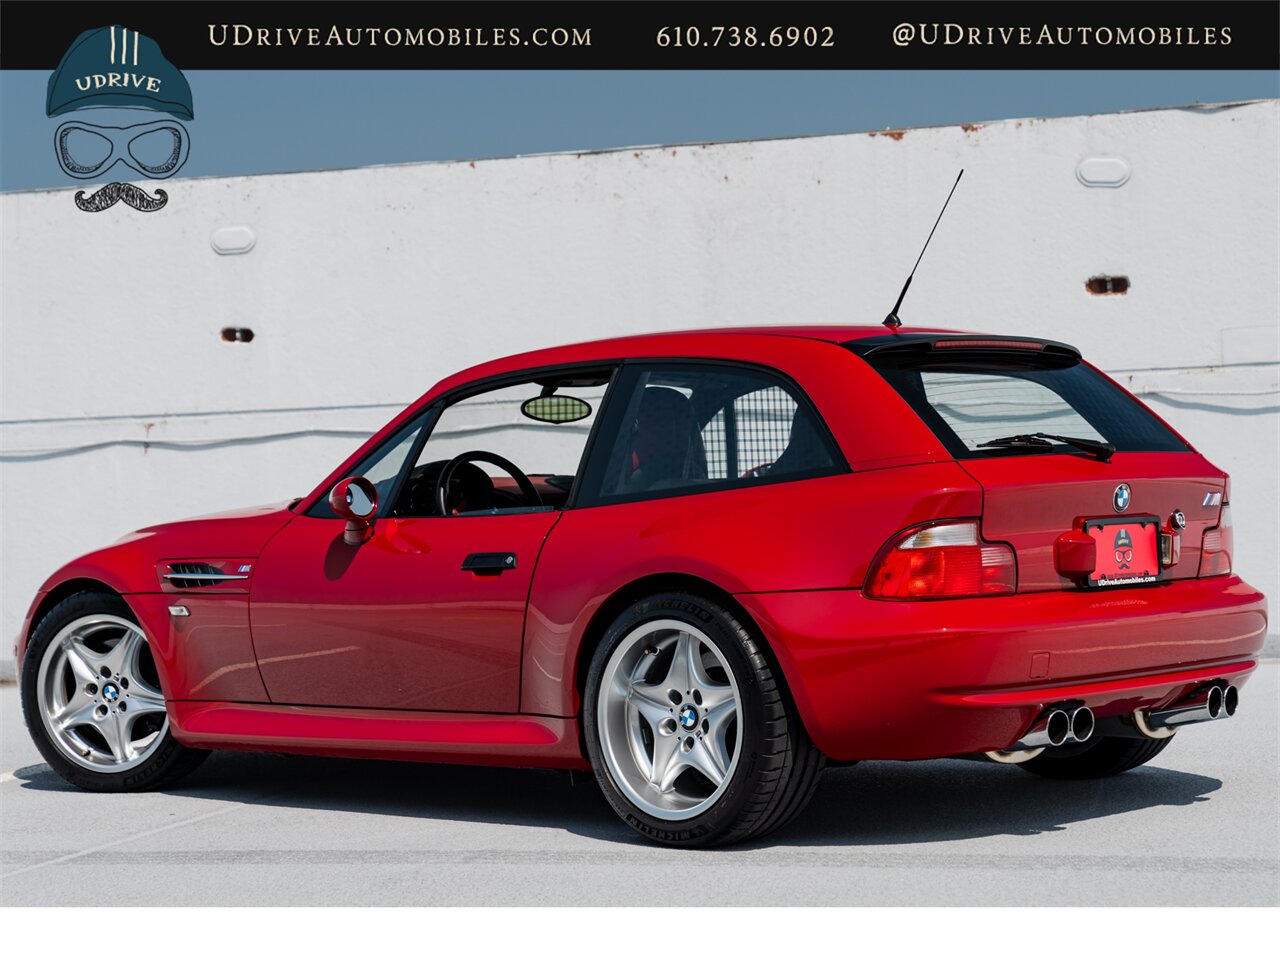 2000 BMW Z3 M  Coupe 25k Miles  Sunroof Delete $4k Recent Service - Photo 4 - West Chester, PA 19382